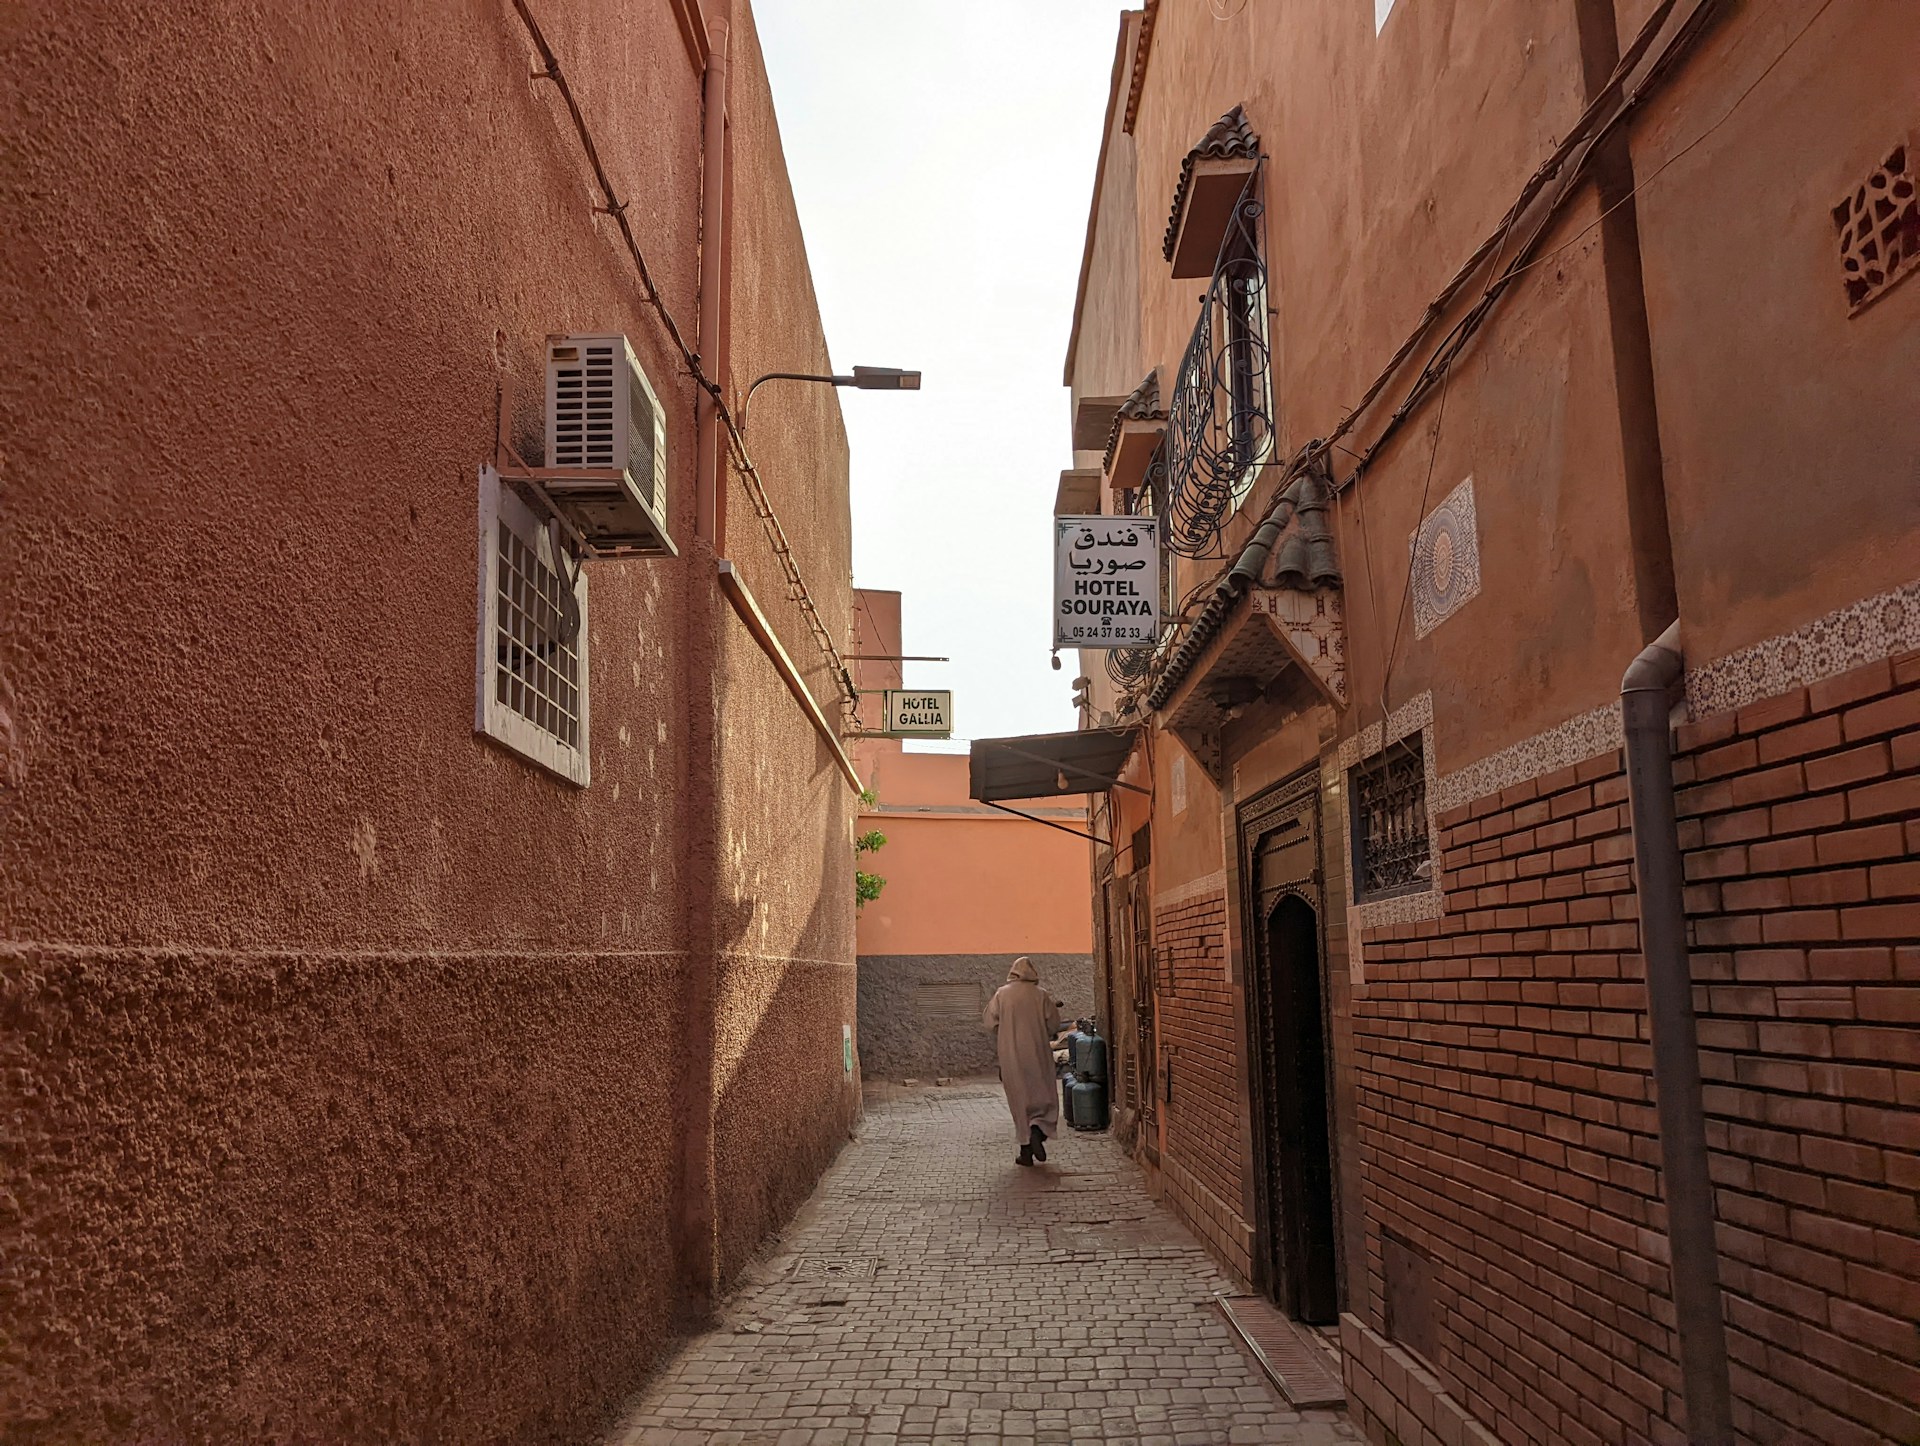 Stay in a Riad in Morocco